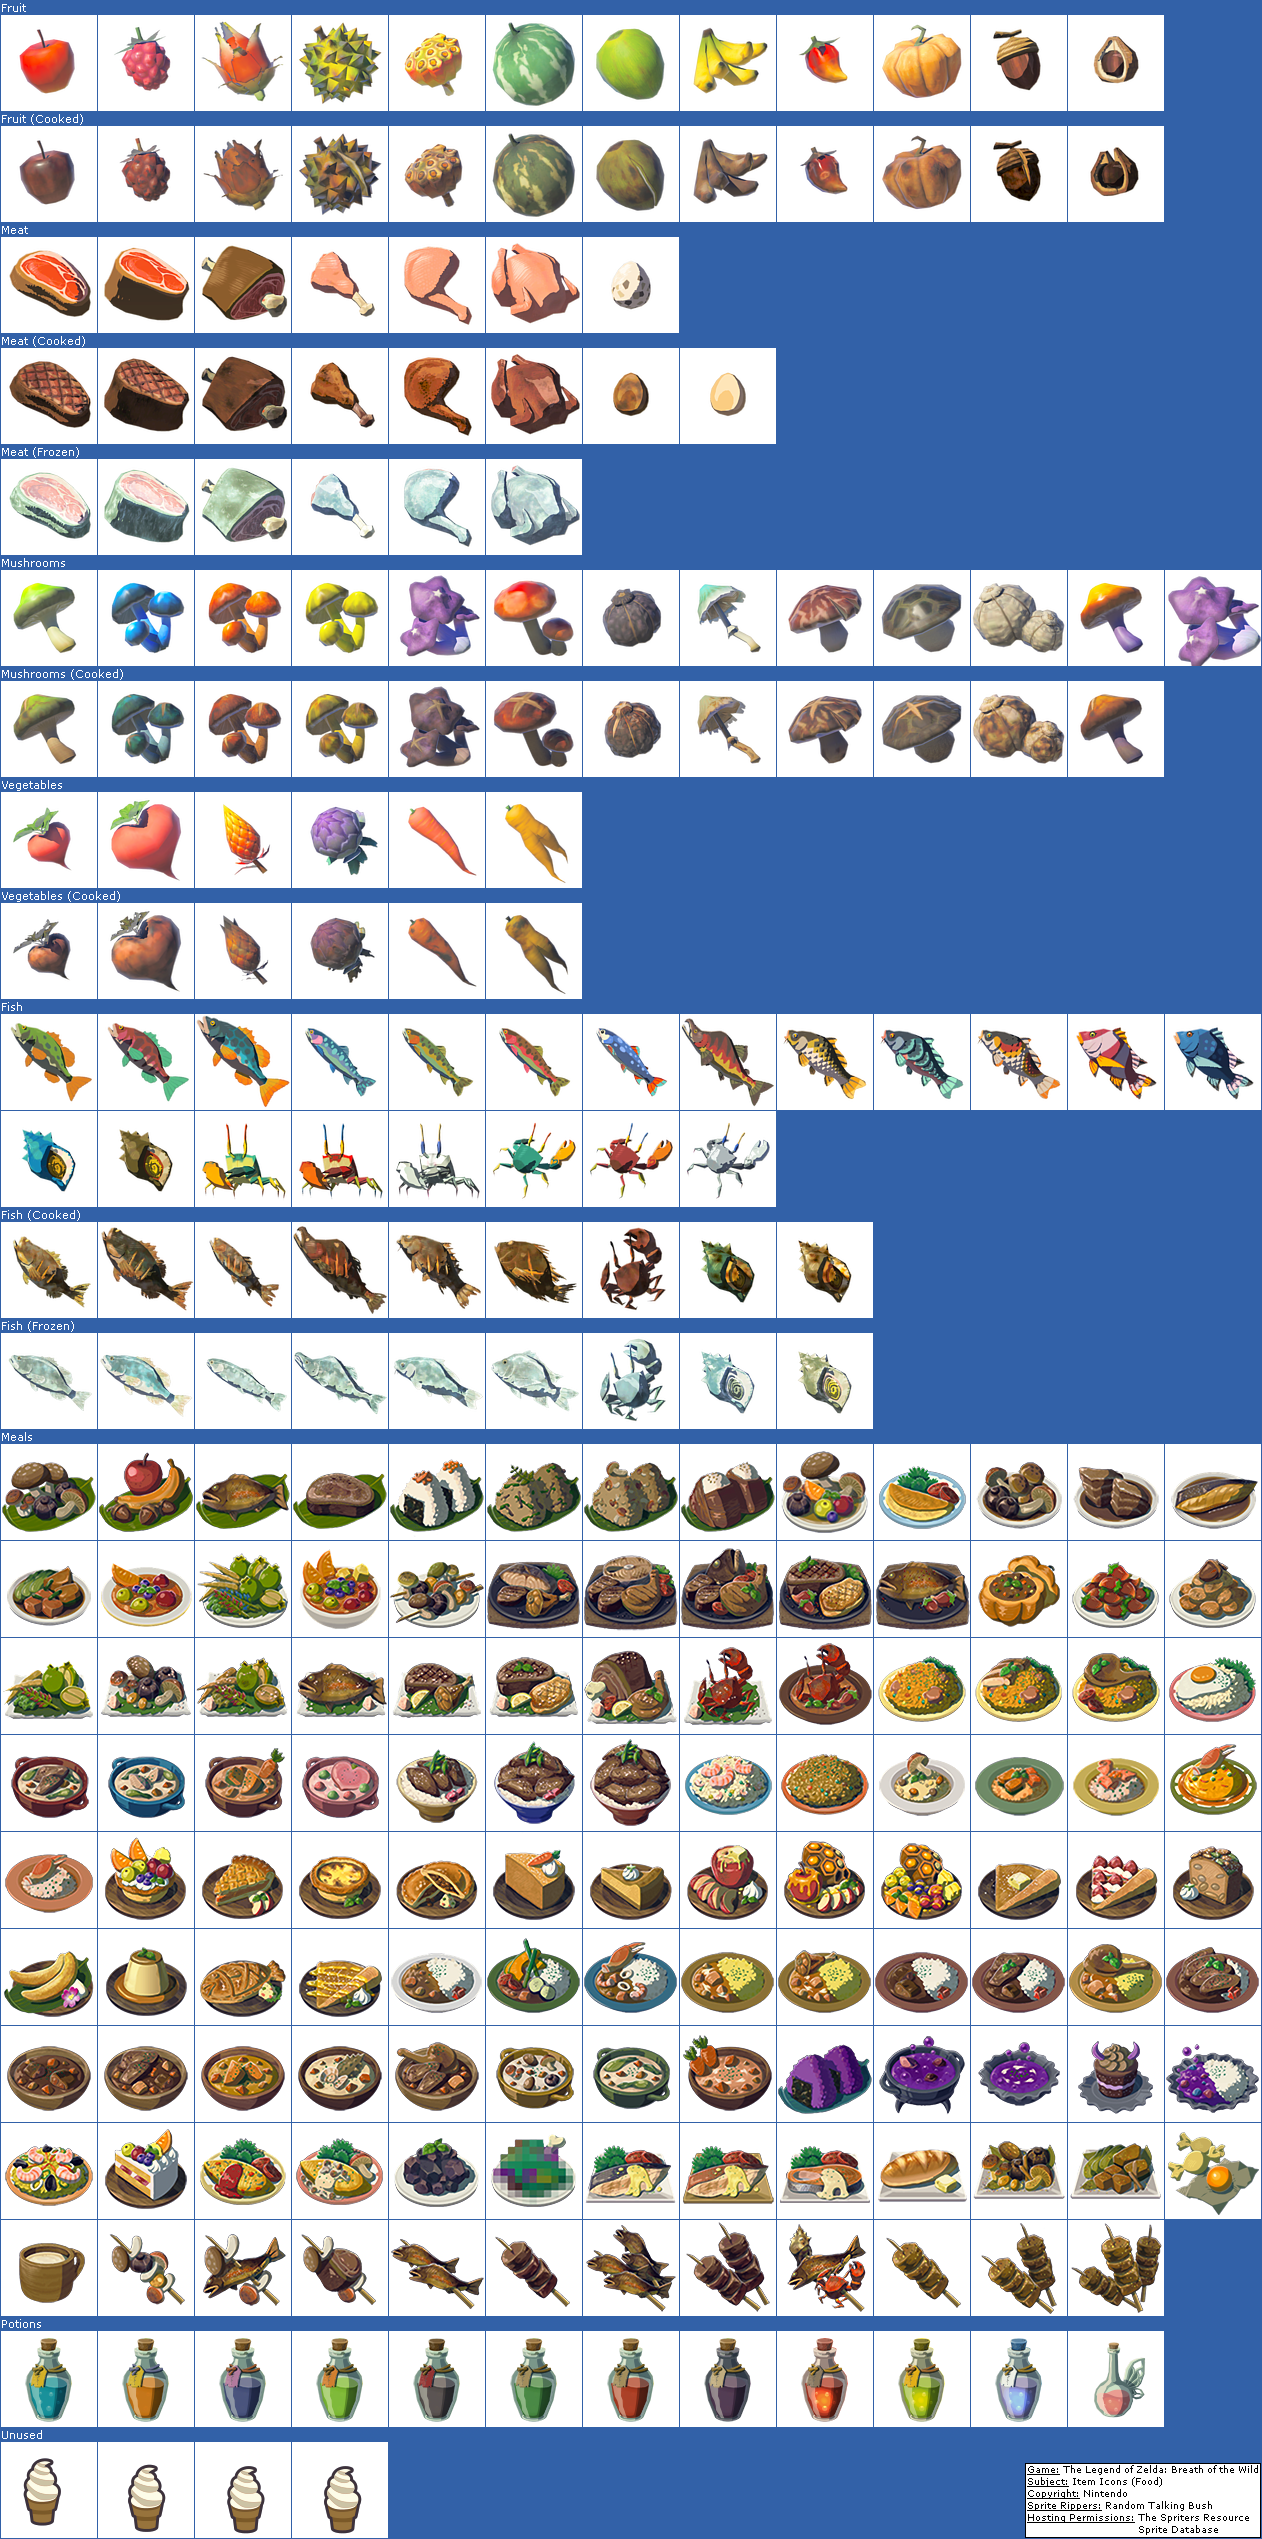 The Legend of Zelda: Breath of the Wild - Item Icons (Food)